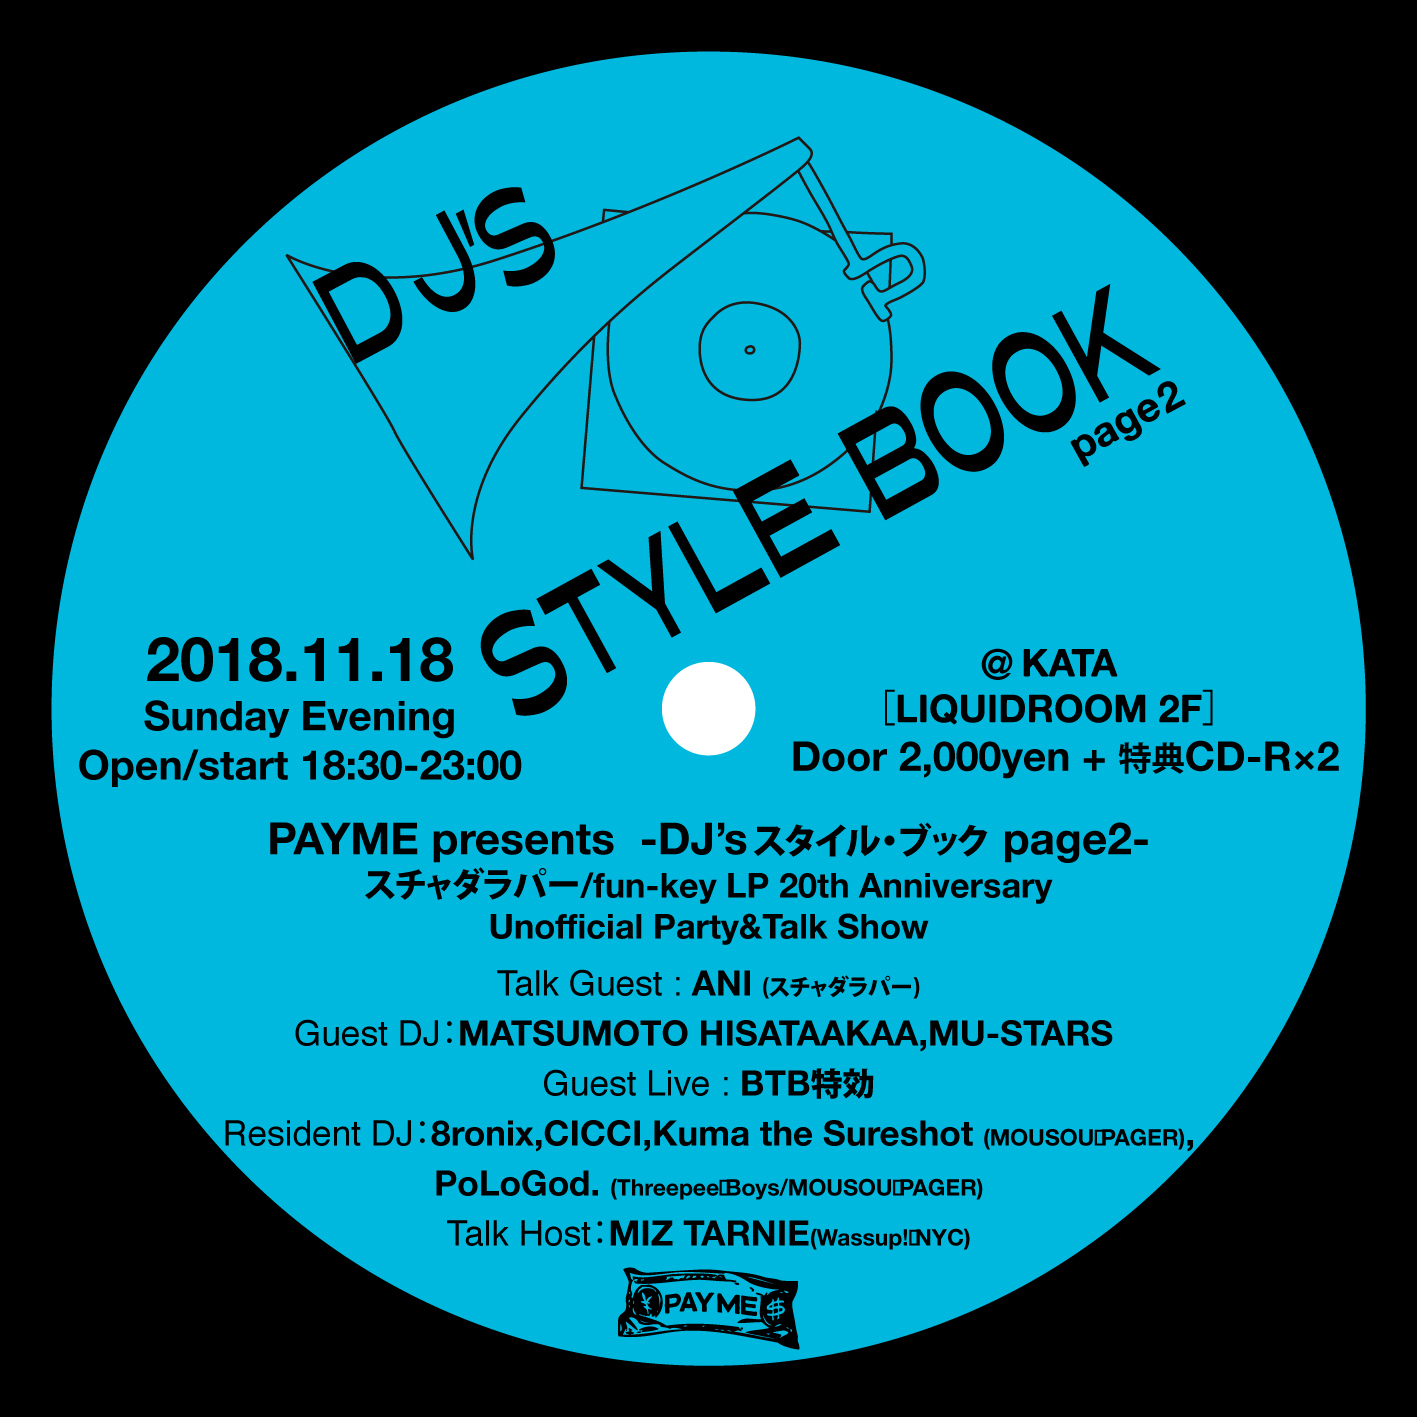 PAY ME presents『DJ’s スタイル・ブック page 2』<br />スチャダラパー / fun – key LP 20th Anniversary Unofficial Party&Talk Show